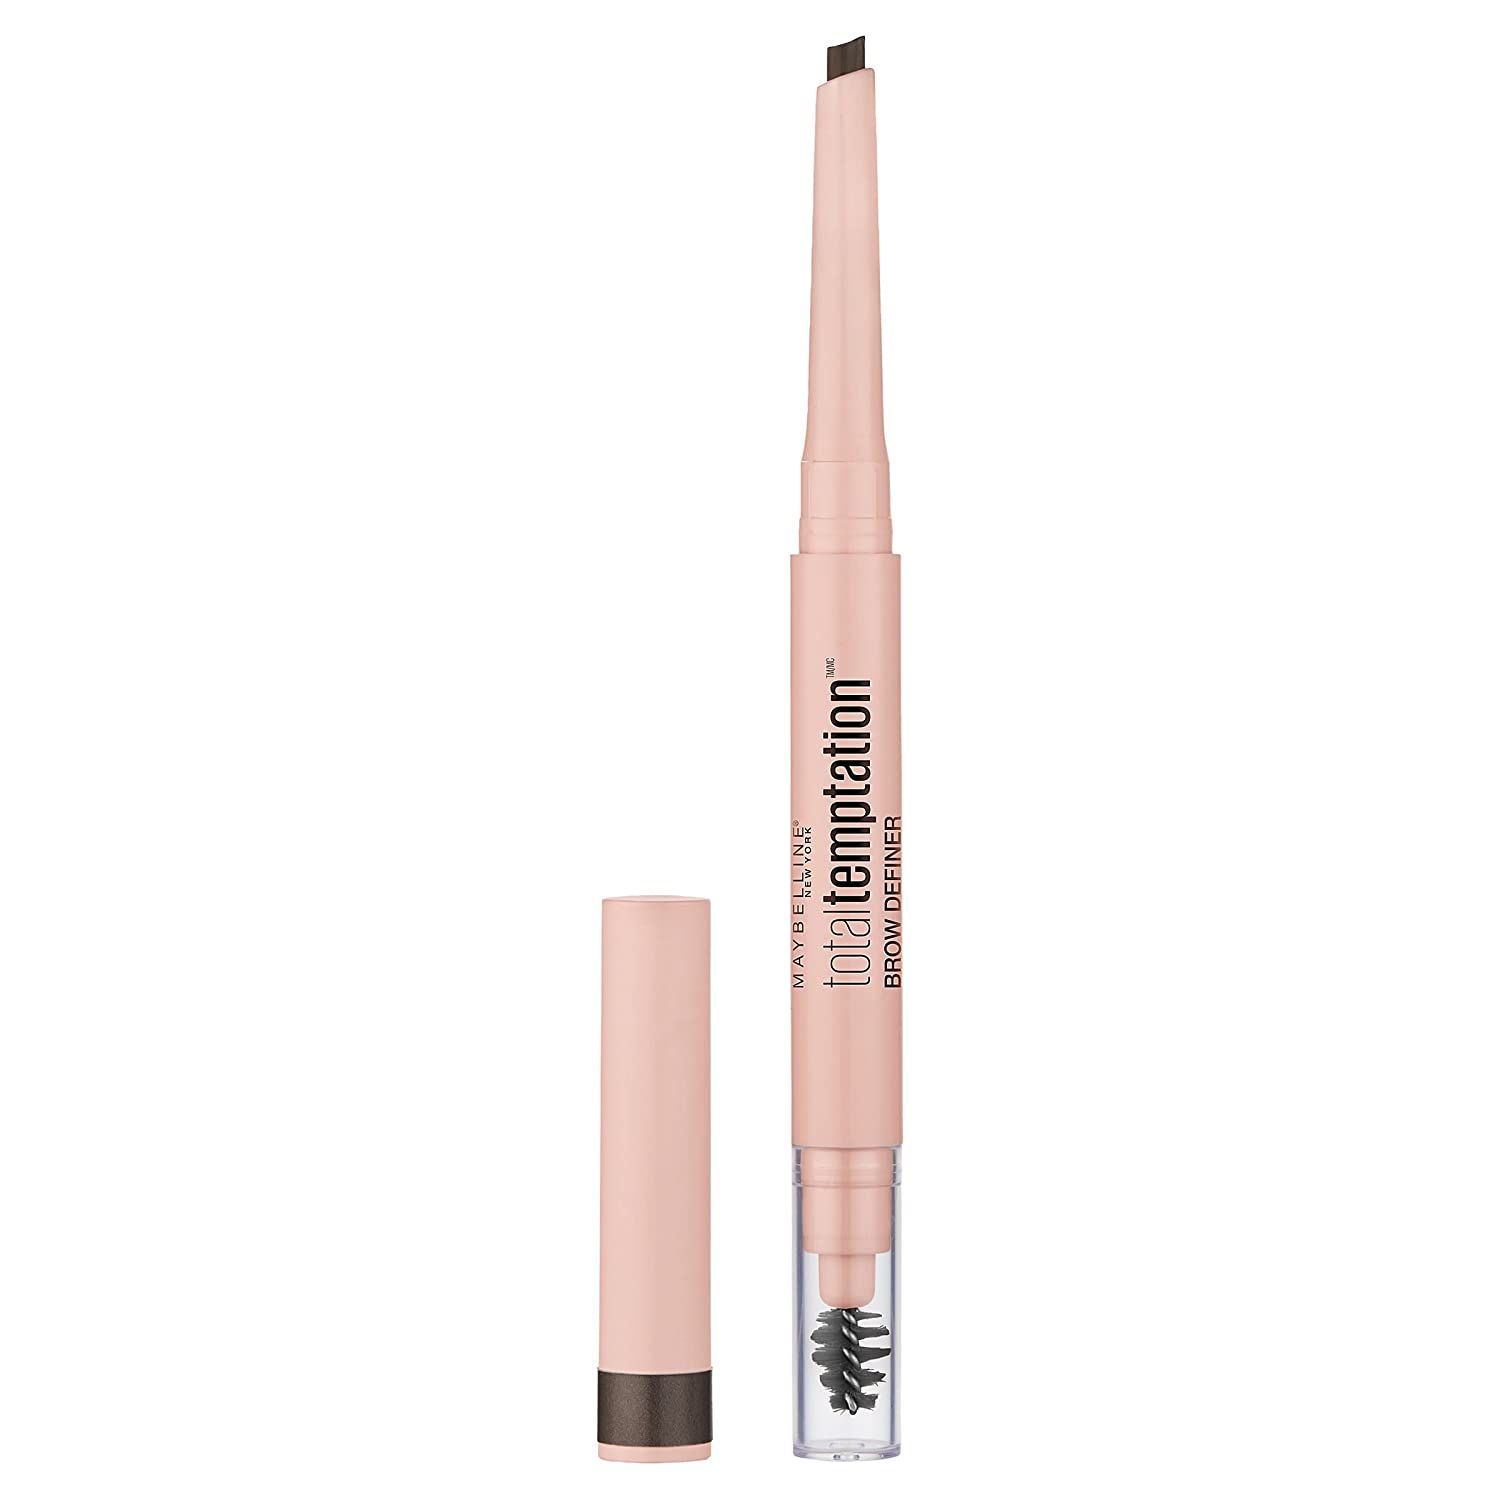 Maybelline Total Temptation Matte Finish Brow Pencil